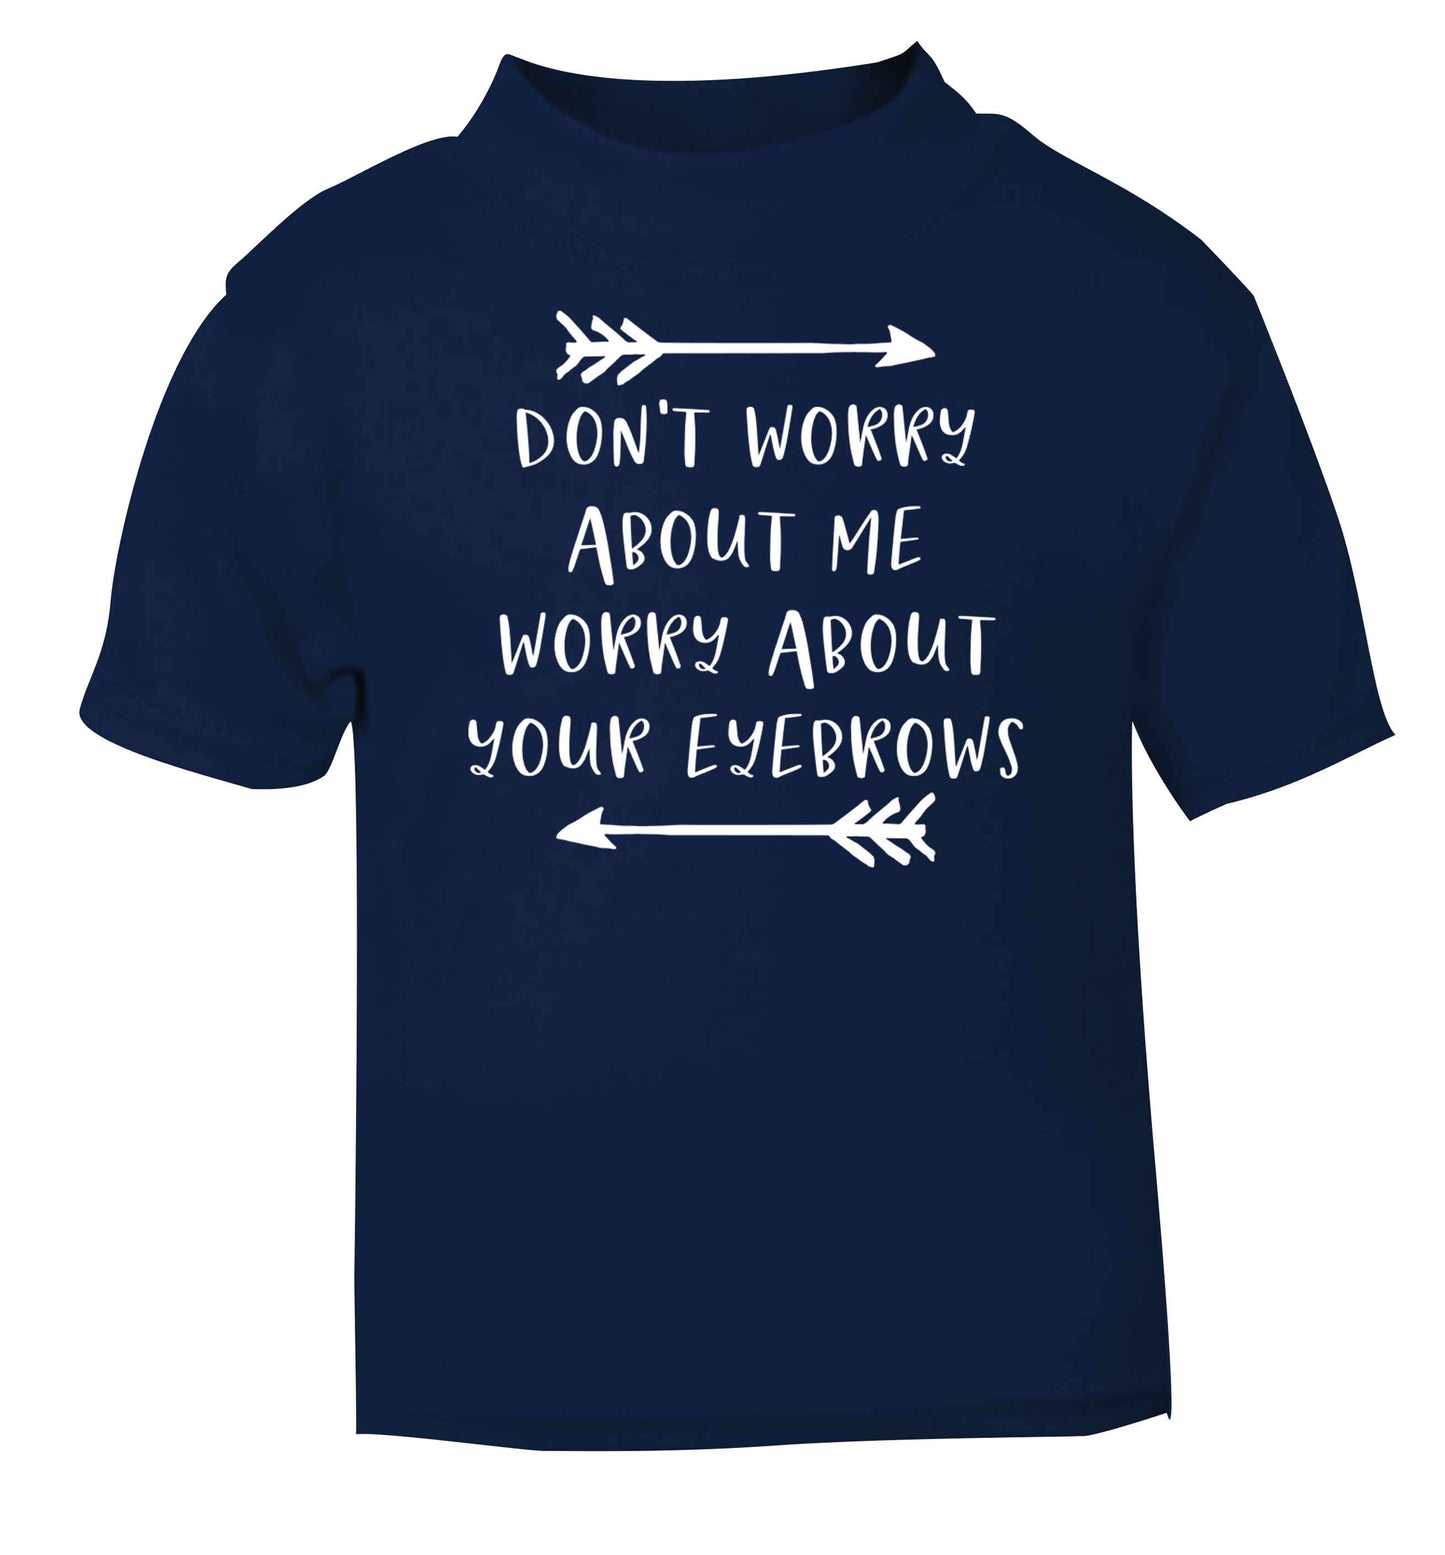 Don't worry about me worry about your eyebrows navy baby toddler Tshirt 2 Years